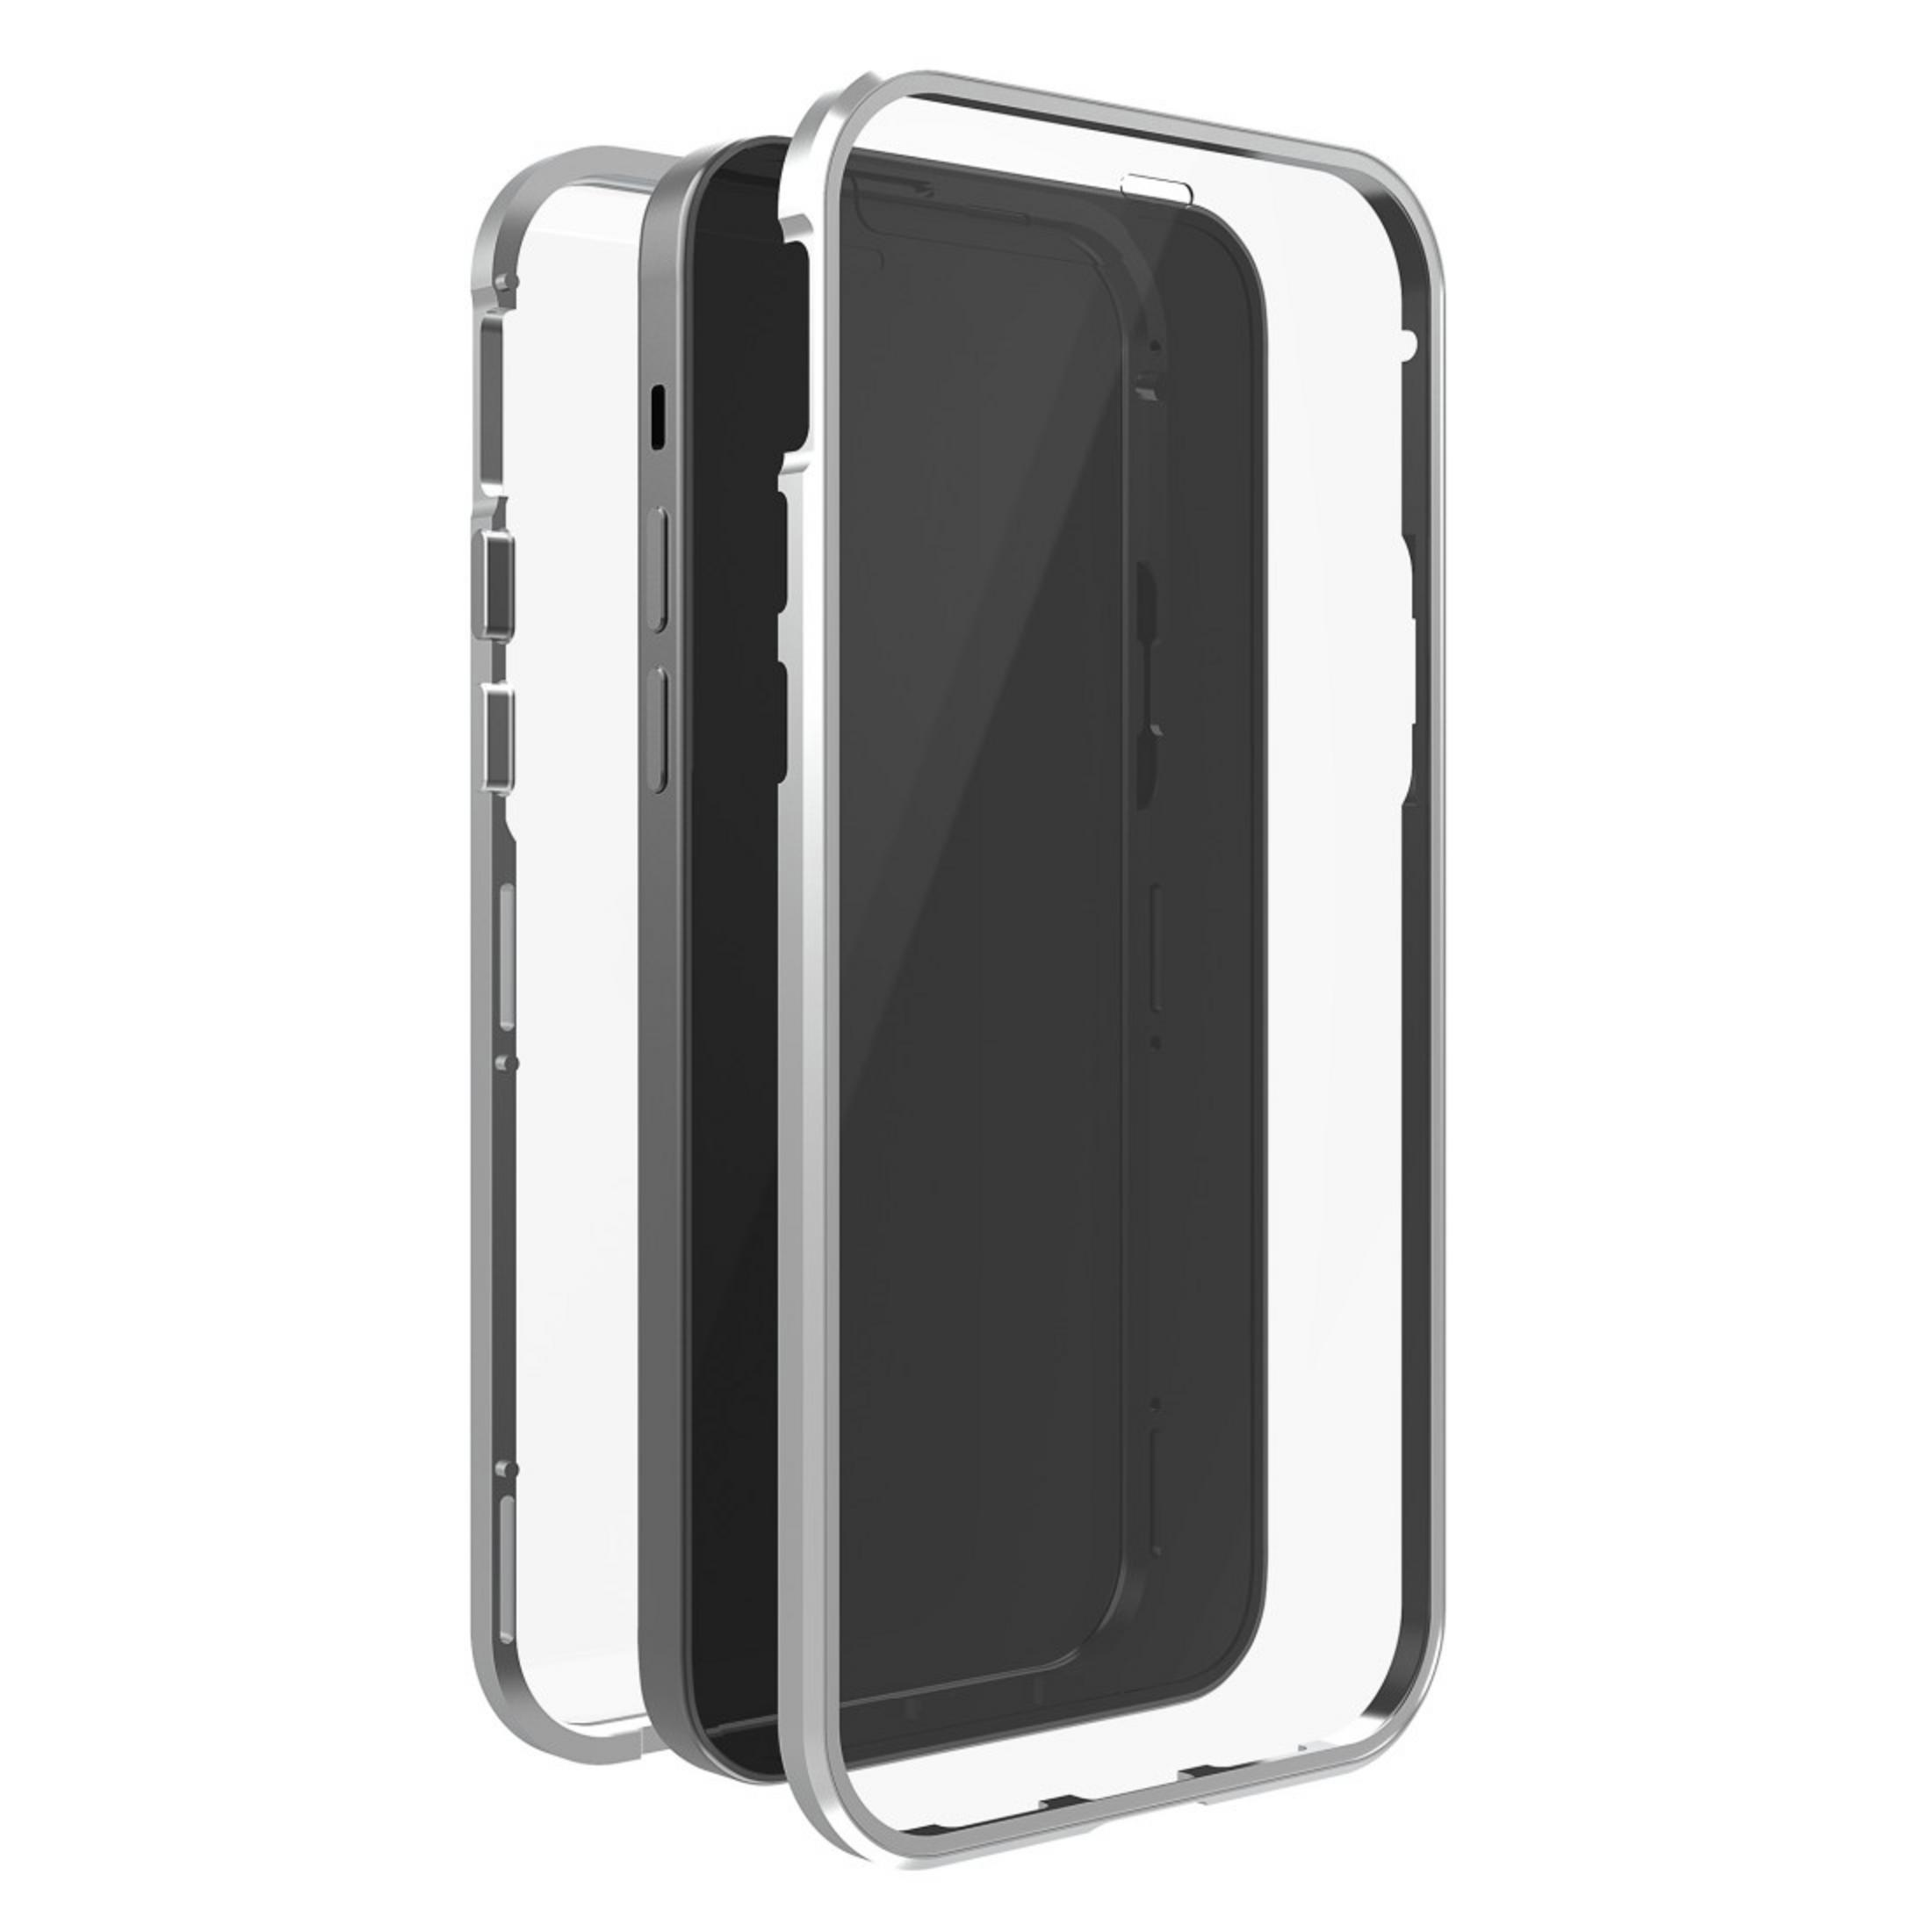 Silber IPH13 ROCK SILBER, 360 Full 217024 PRO Pro, iPhone Cover, COVER BLACK Apple, GLASS 13